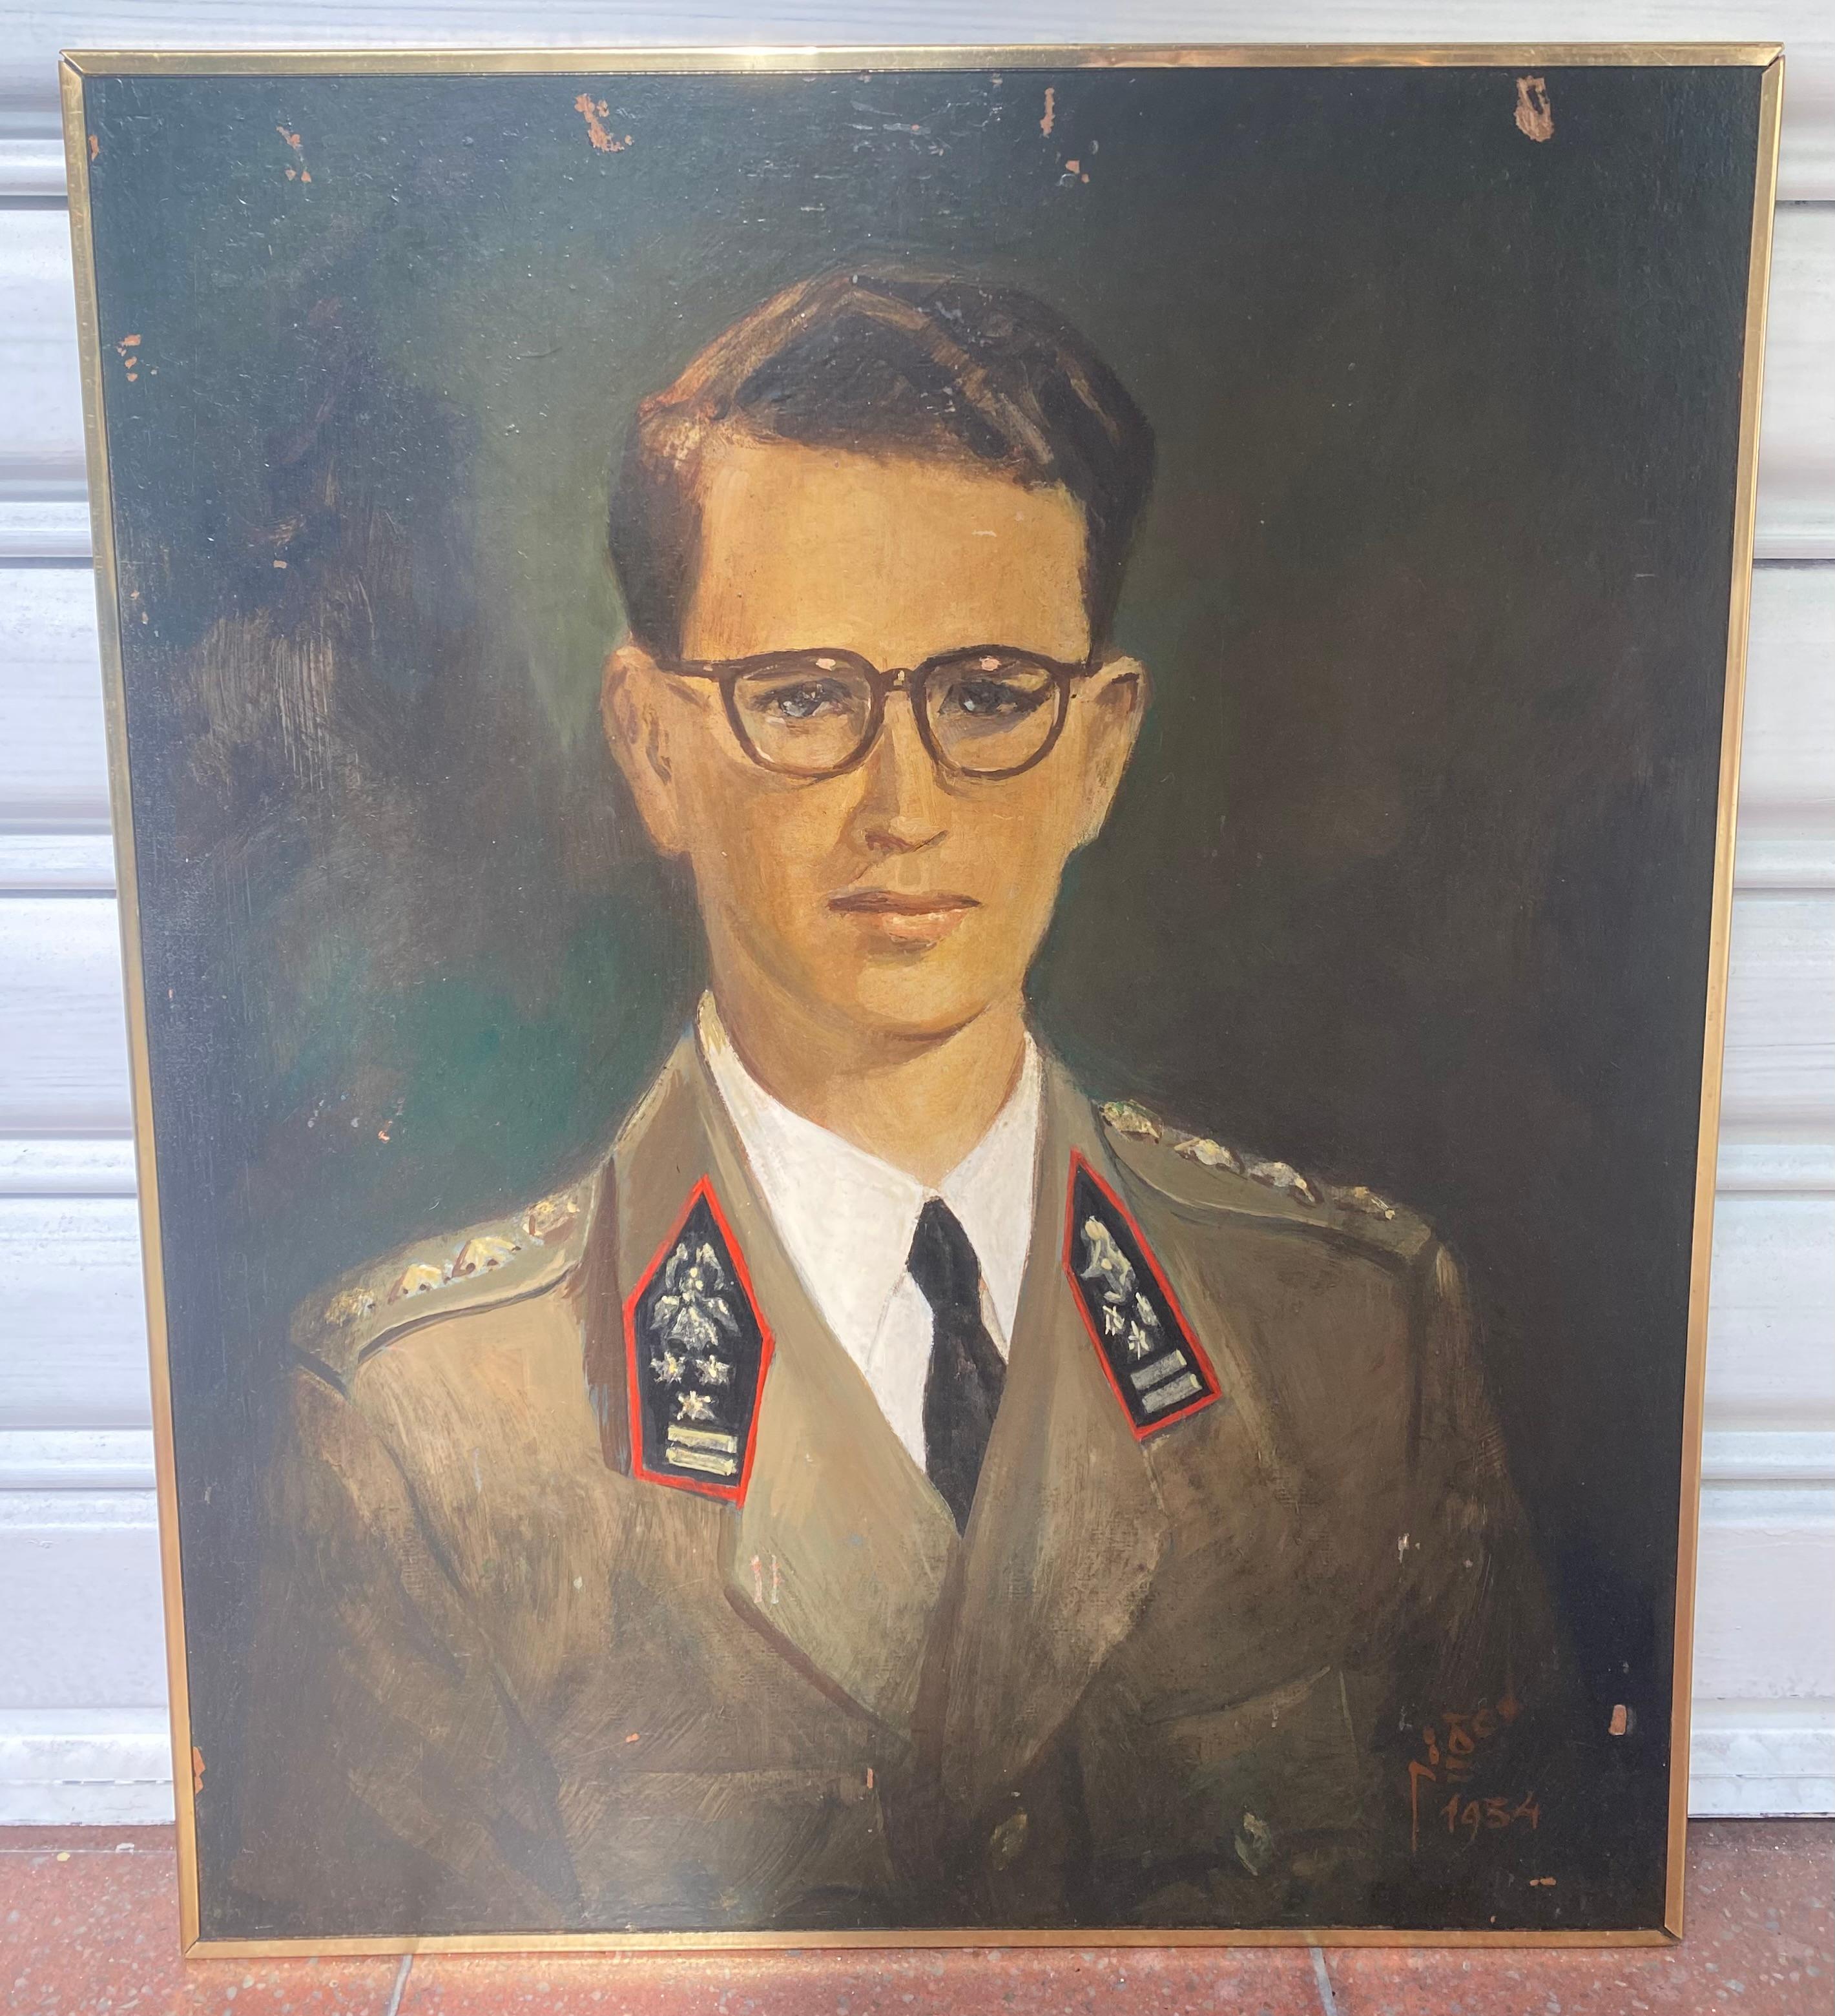 Portrait of his Majesty Baudouin I - Pierre Piget
Oil on isorel signed and dated lower right
Numbered on the back : 46
Size : 50cm x 61cm
1954 
250€

King Baudouin was a remarkable Christian who led an exemplary life. 